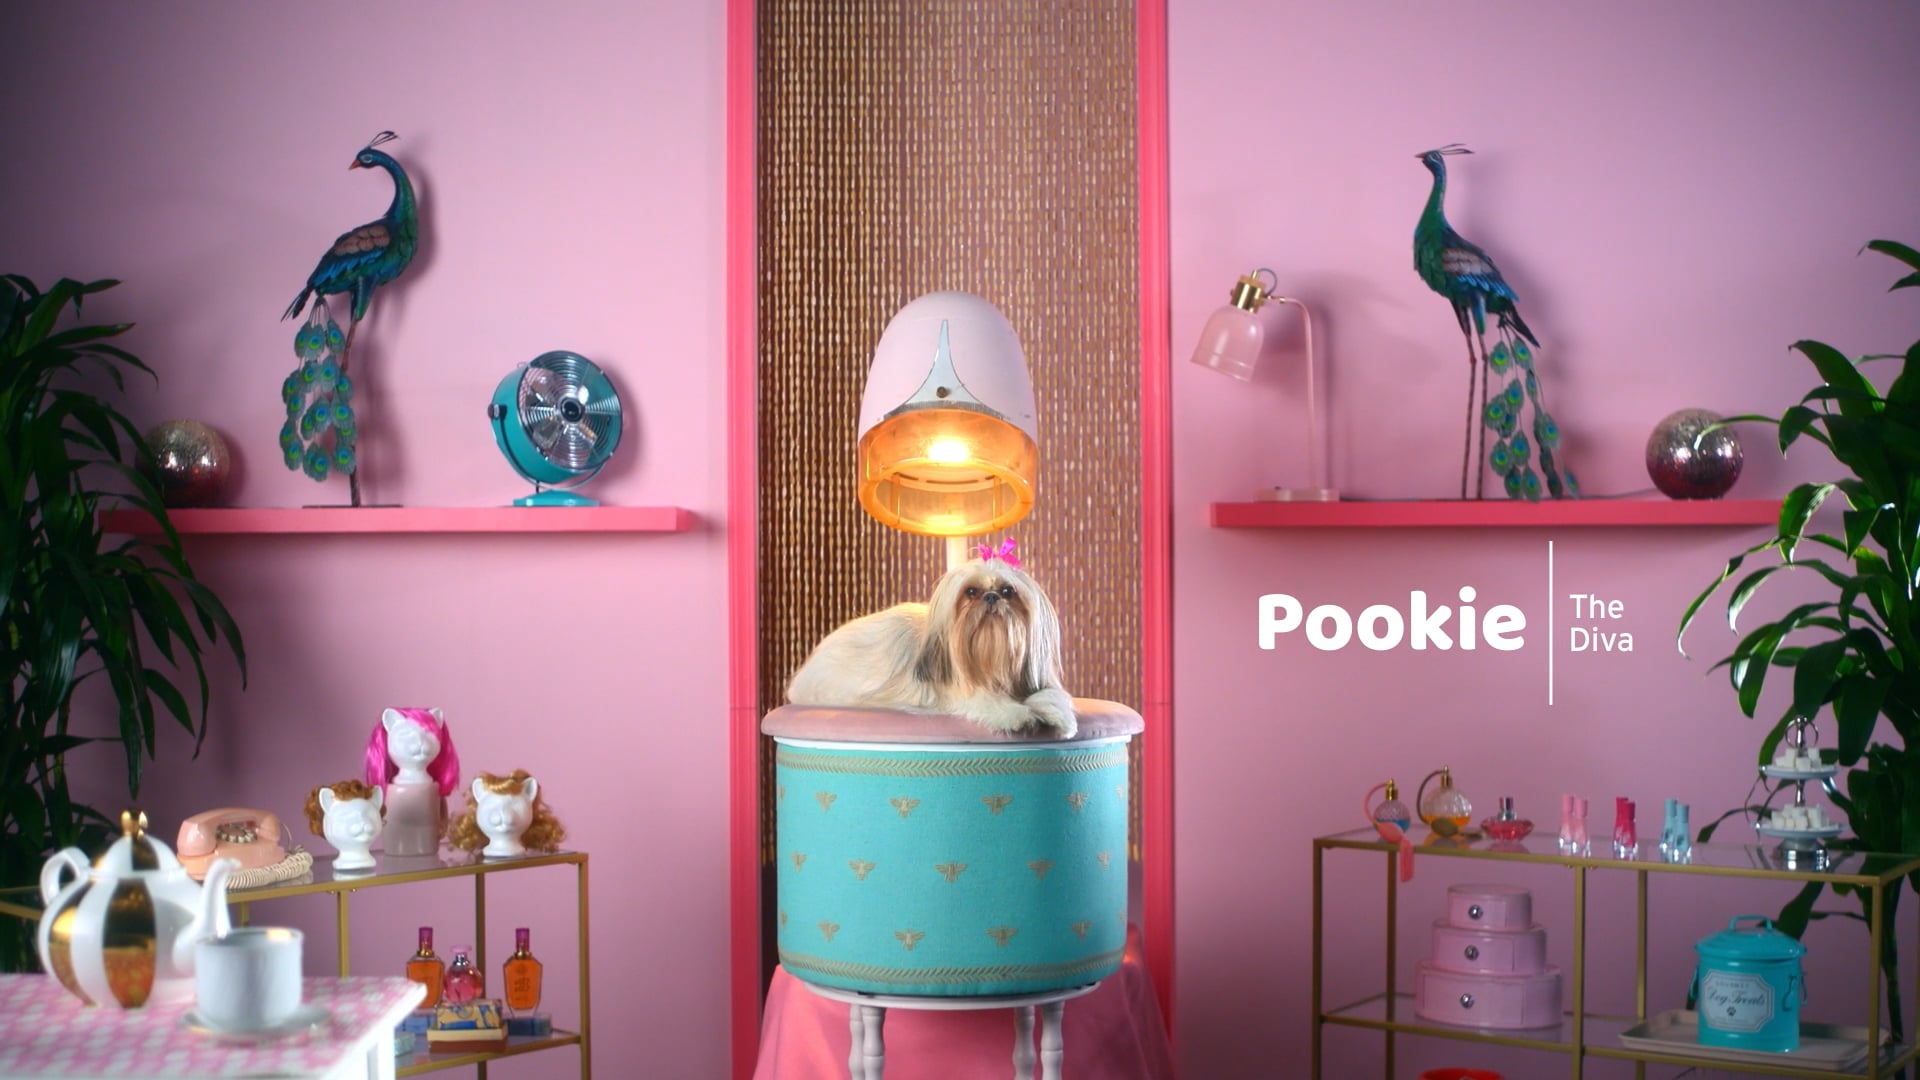 Physicians Mutual "Pookie"